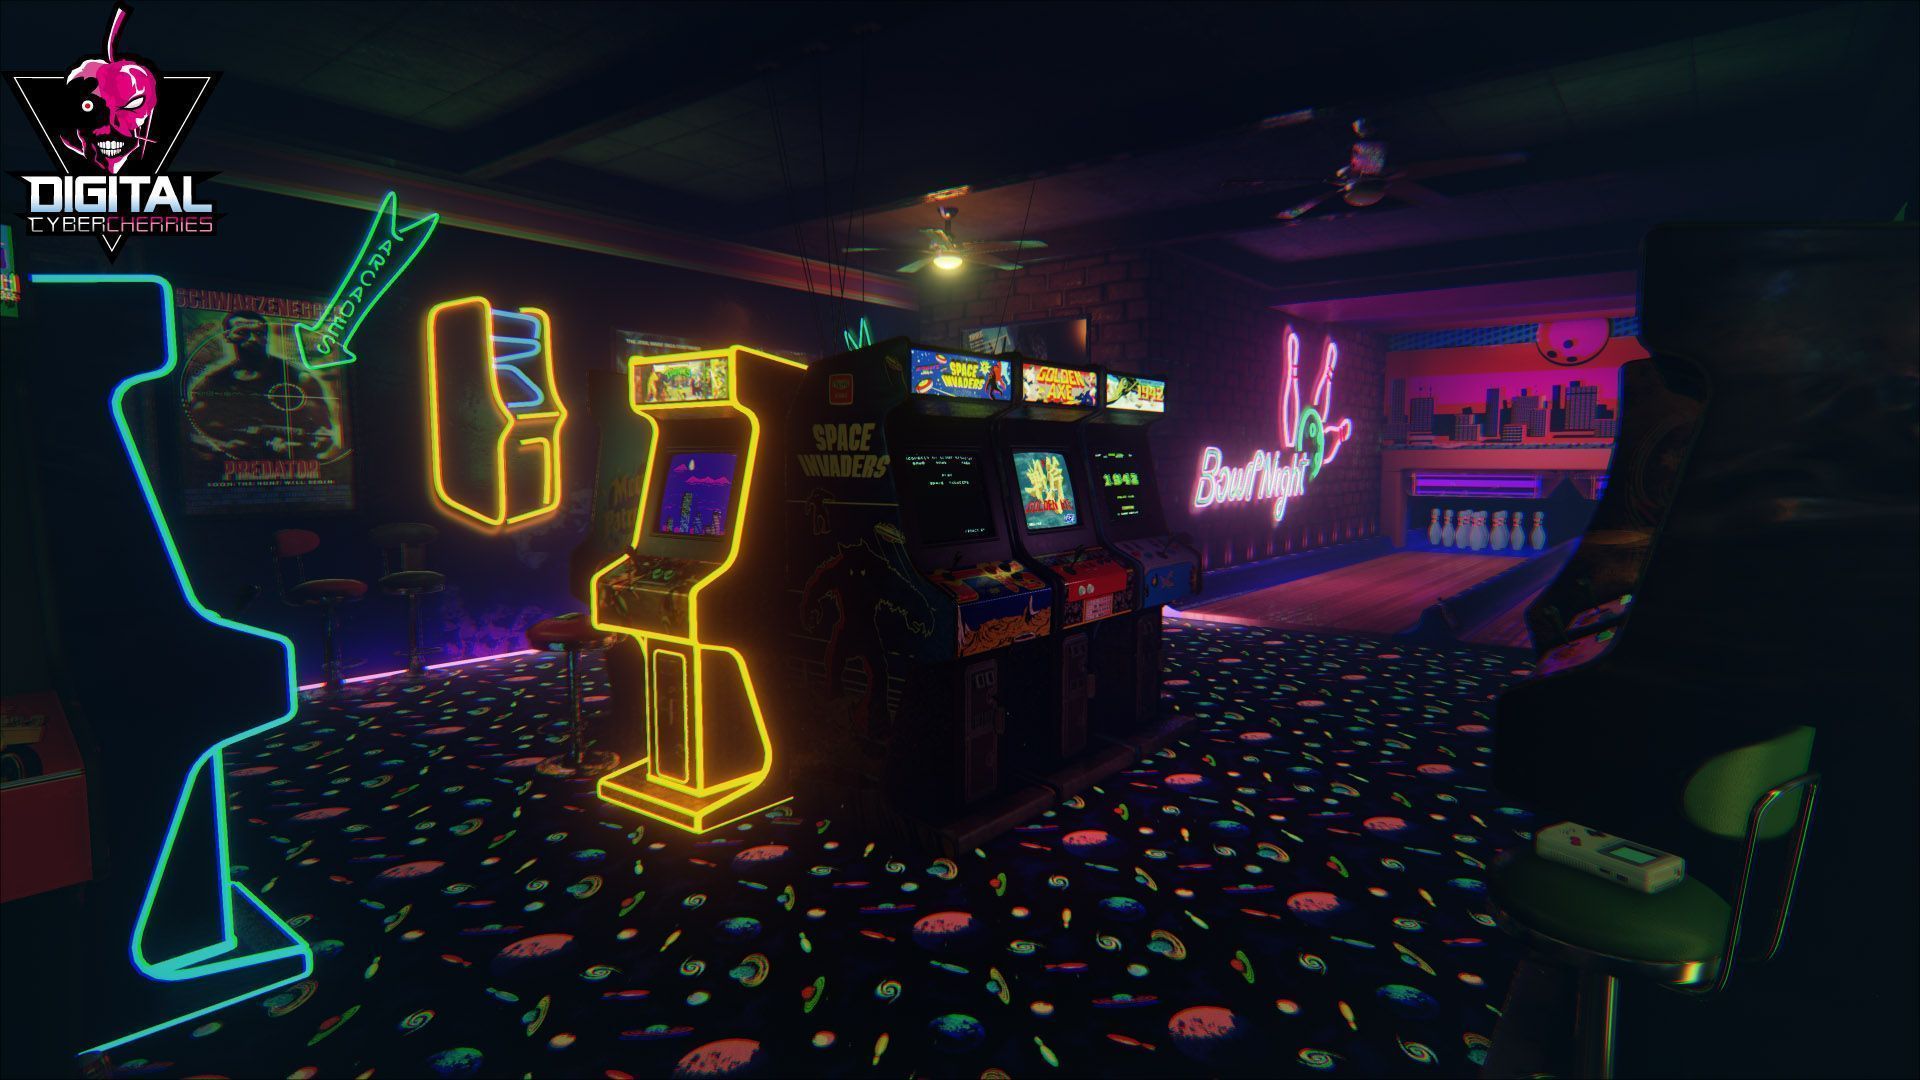 A neon-lit arcade room with Space Invaders, Donkey Kong, and other classic games. - Arcade